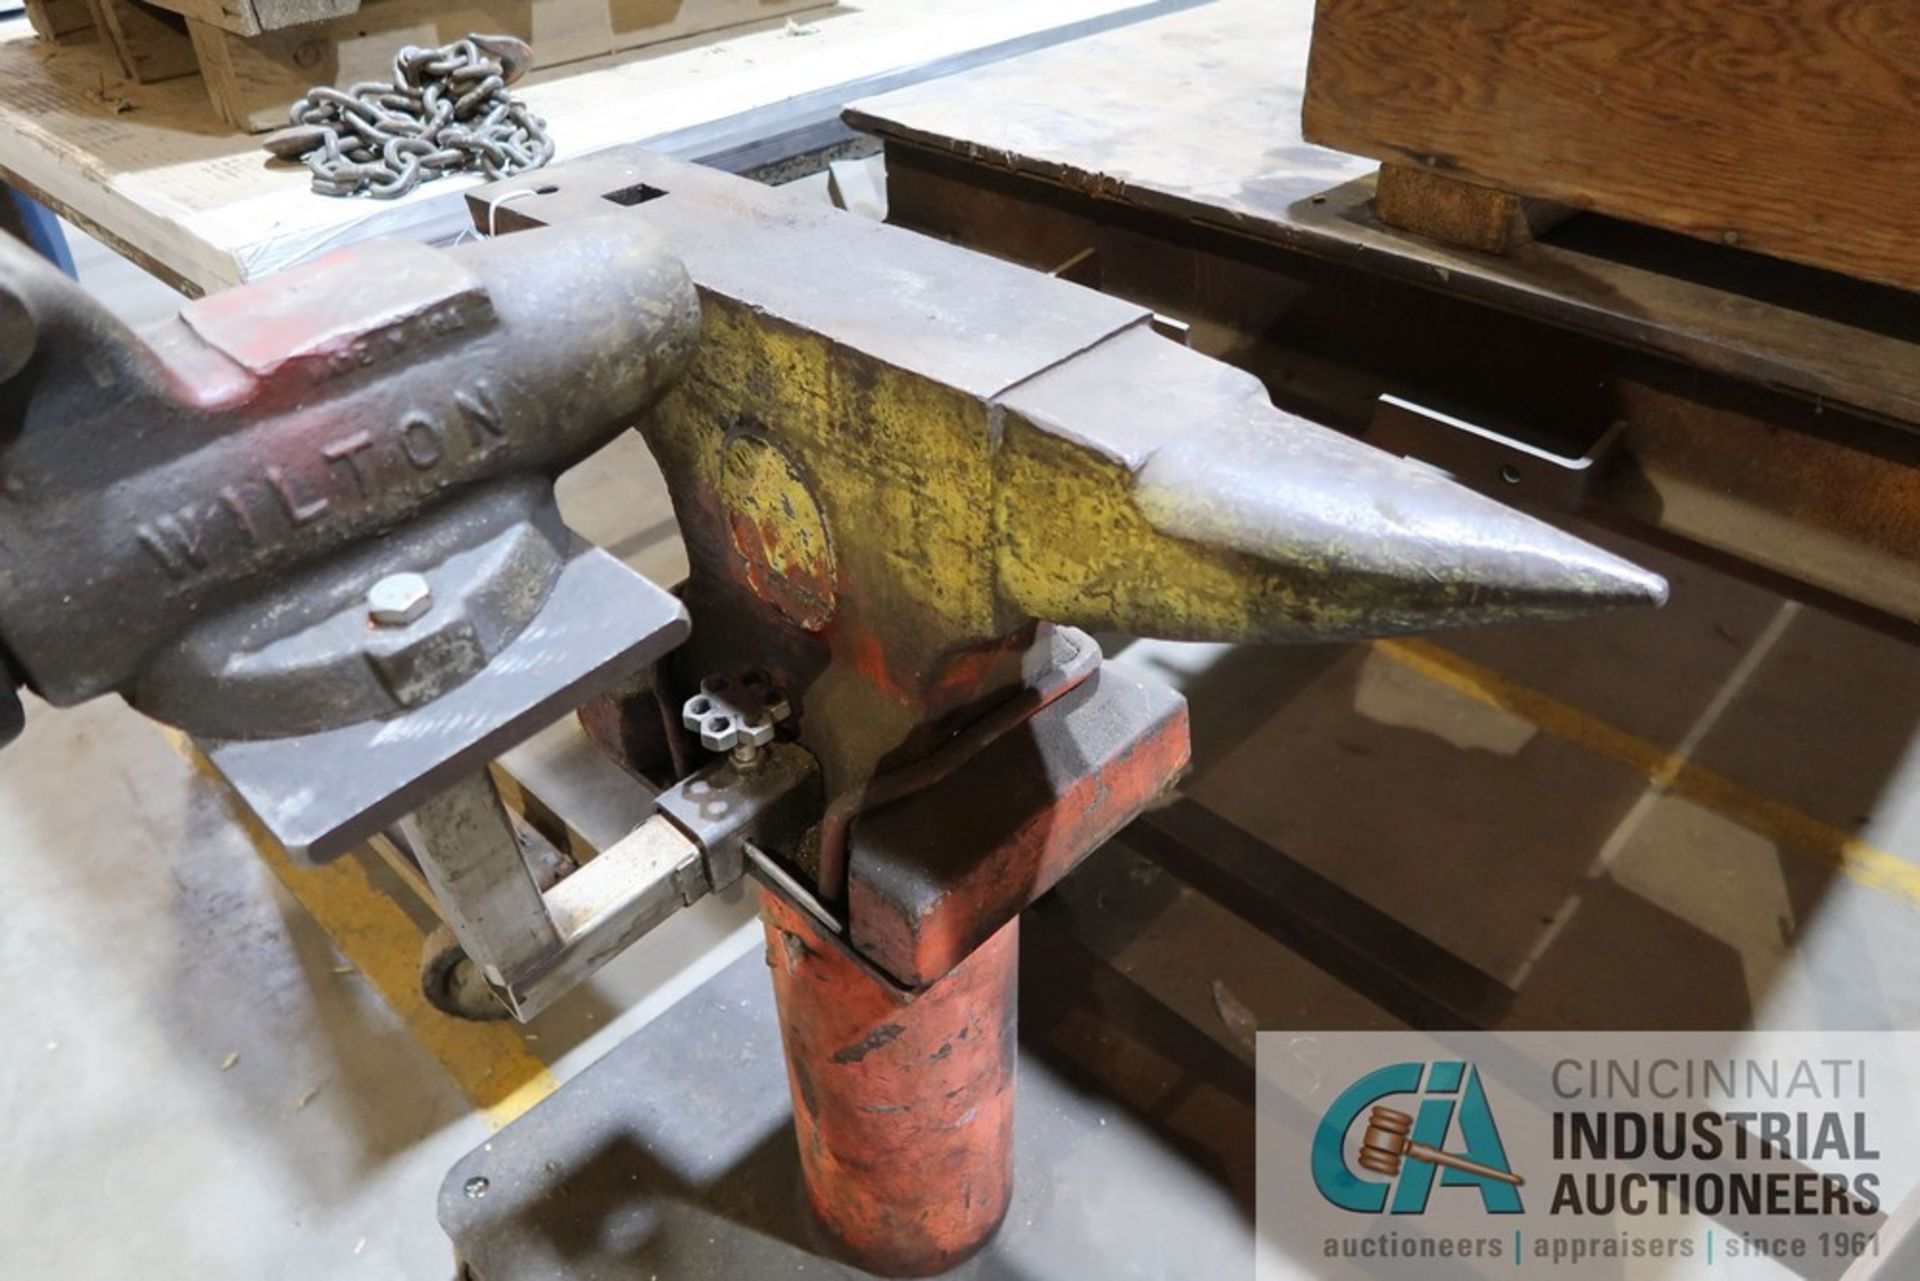 VULCAN PORTABLE STAND MOUNTED ANVIL WITH 4" WILTON VISE - Image 3 of 3